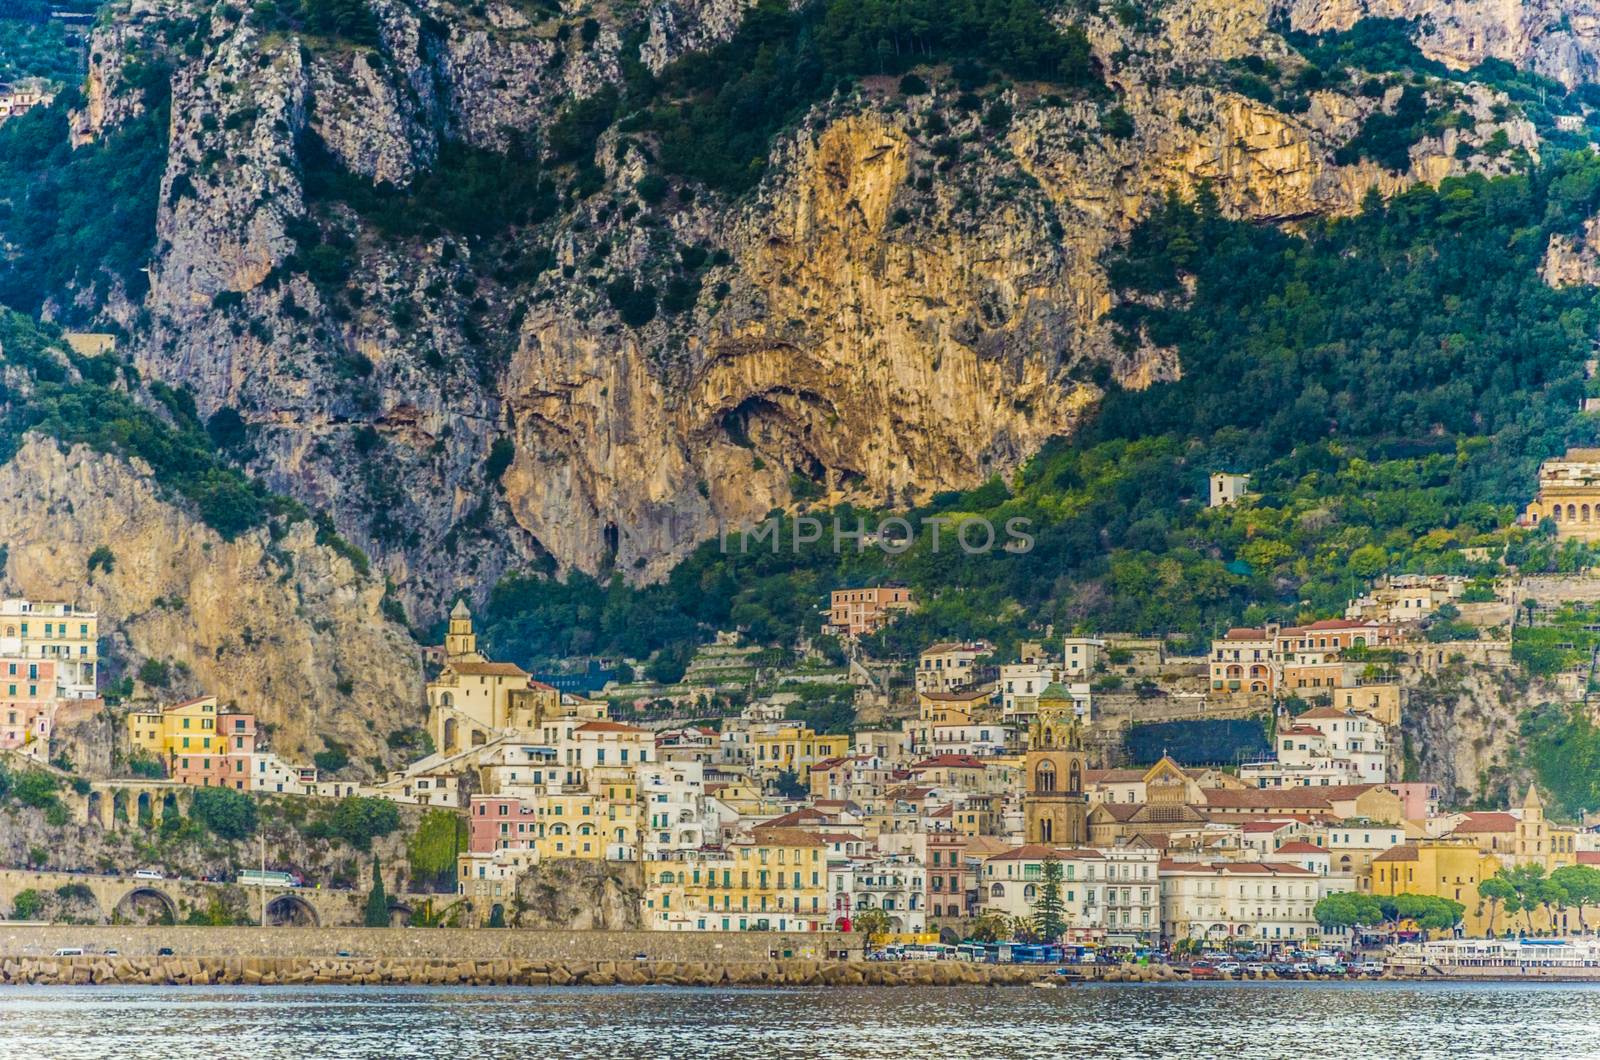 Positano with its colorful buildings and cliffs. by MAEKFOTO